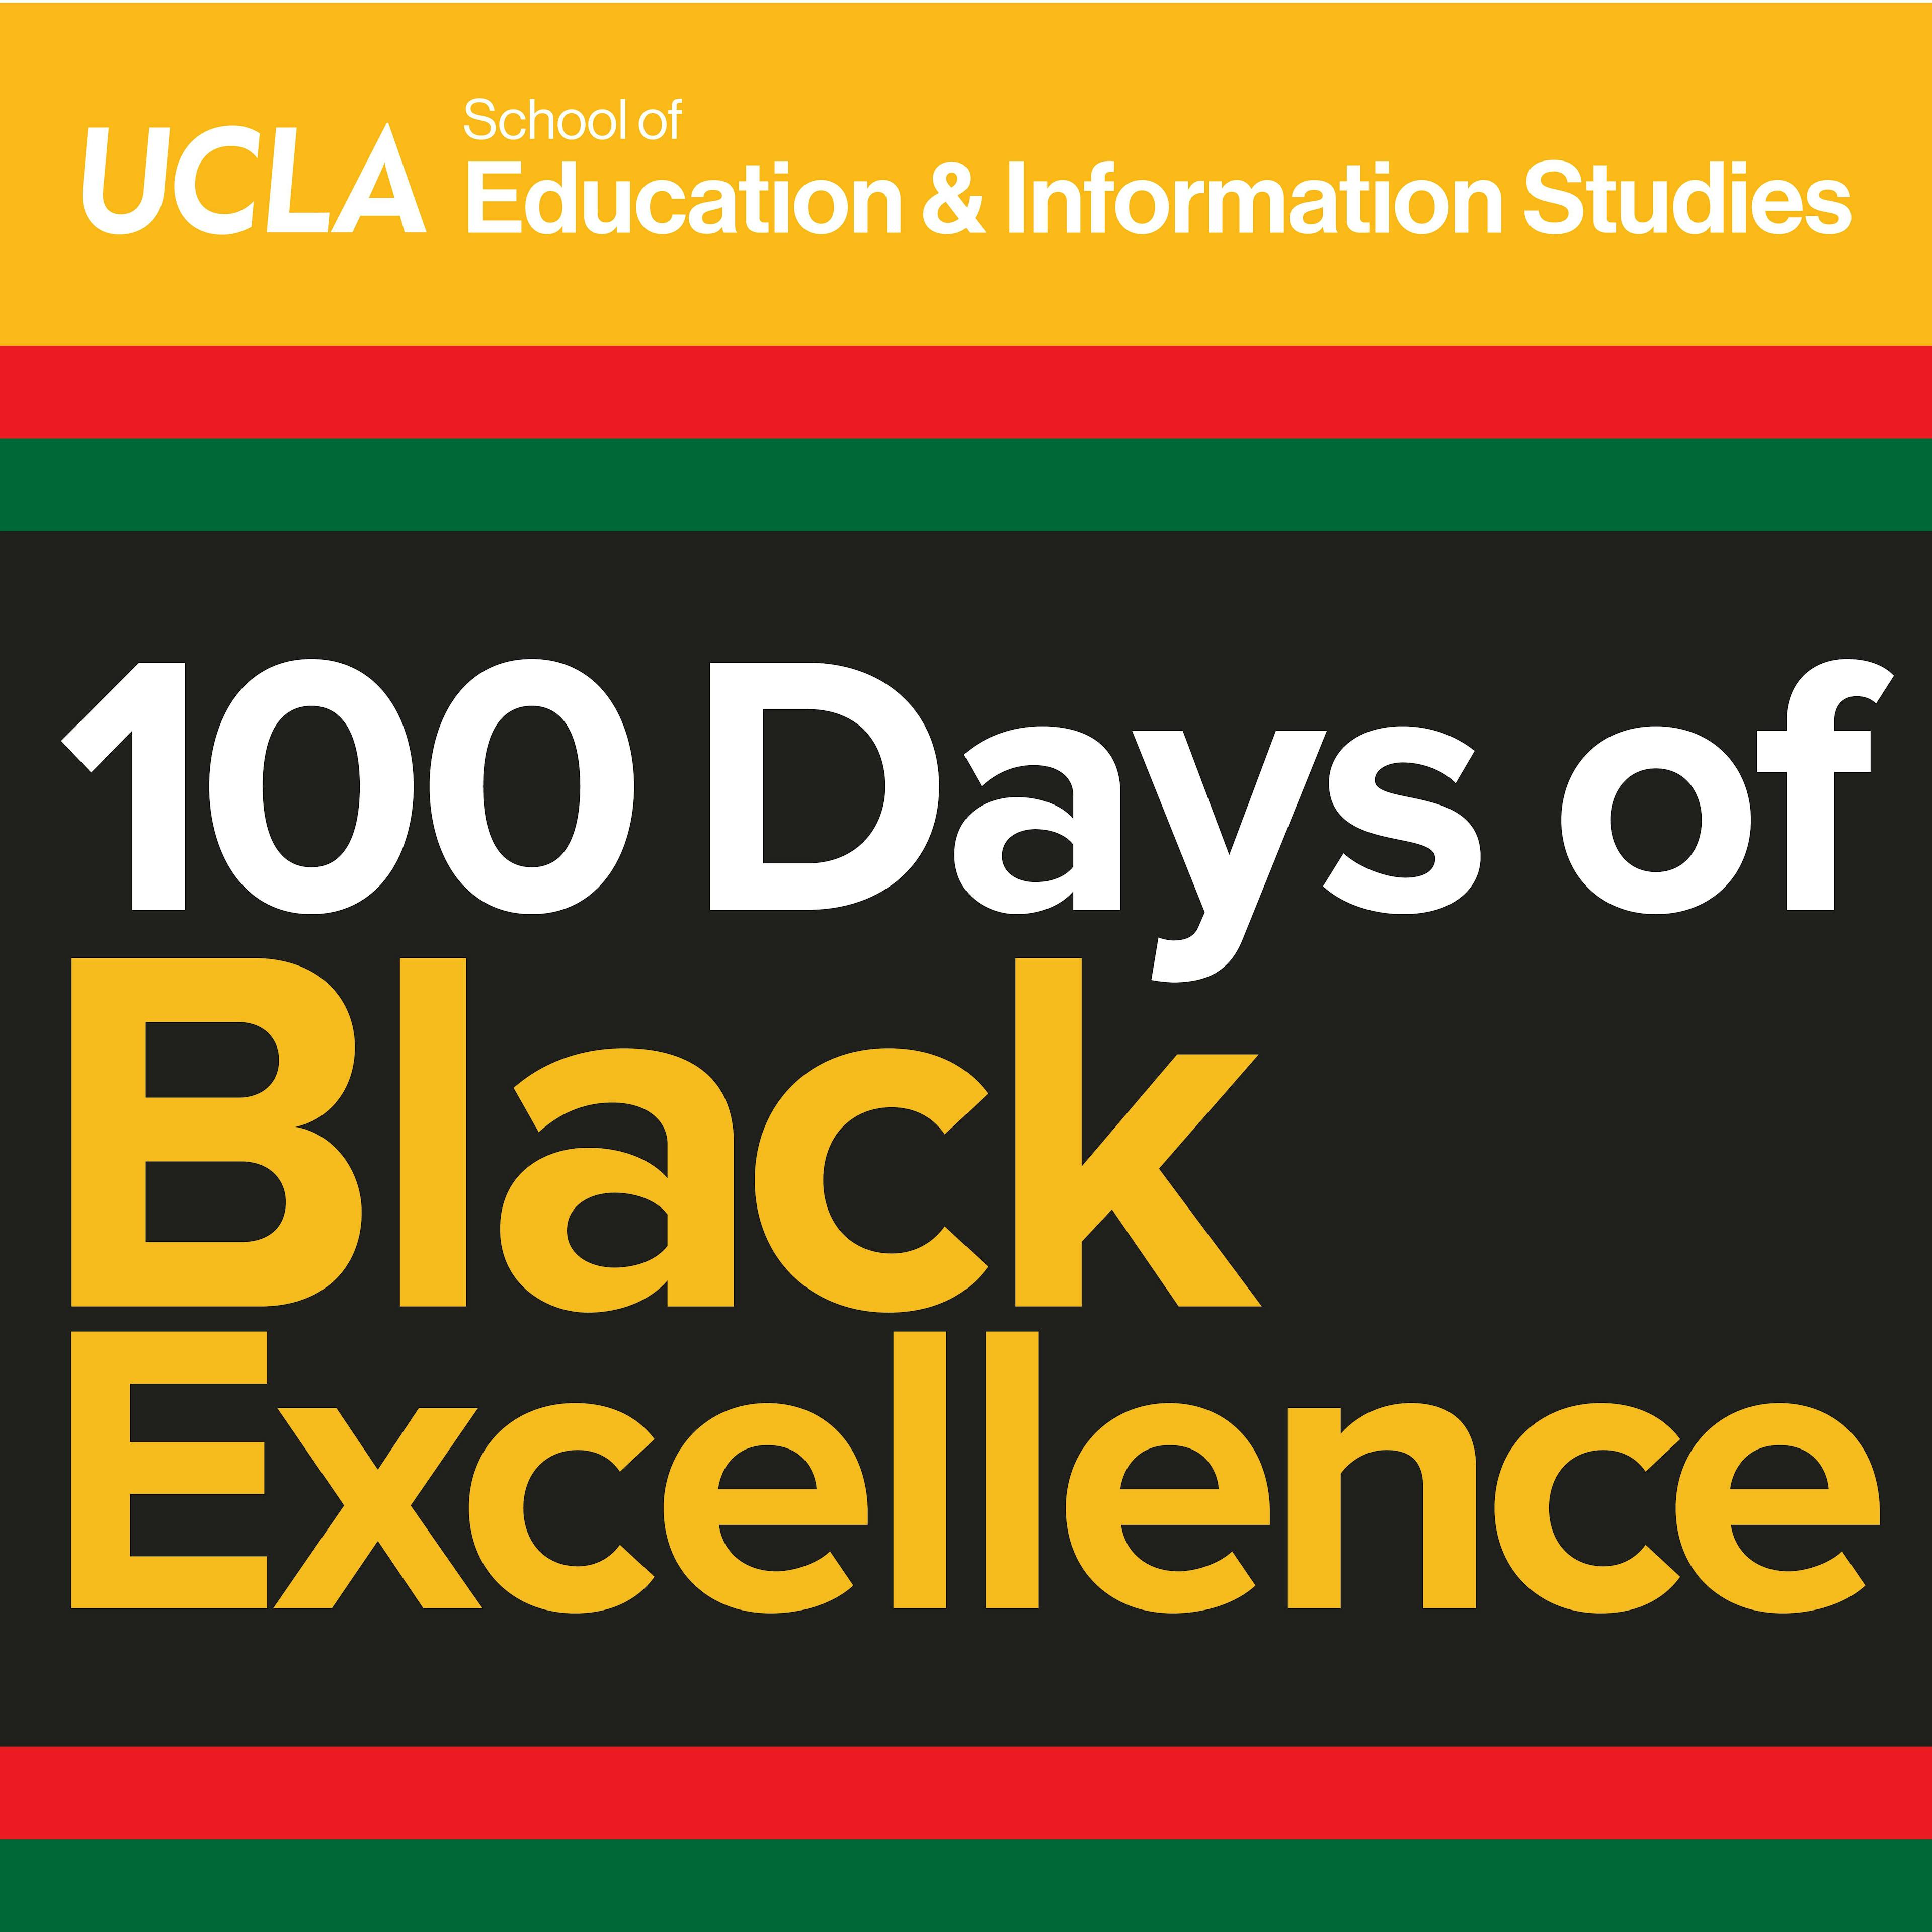 100 Days of Black Excellence